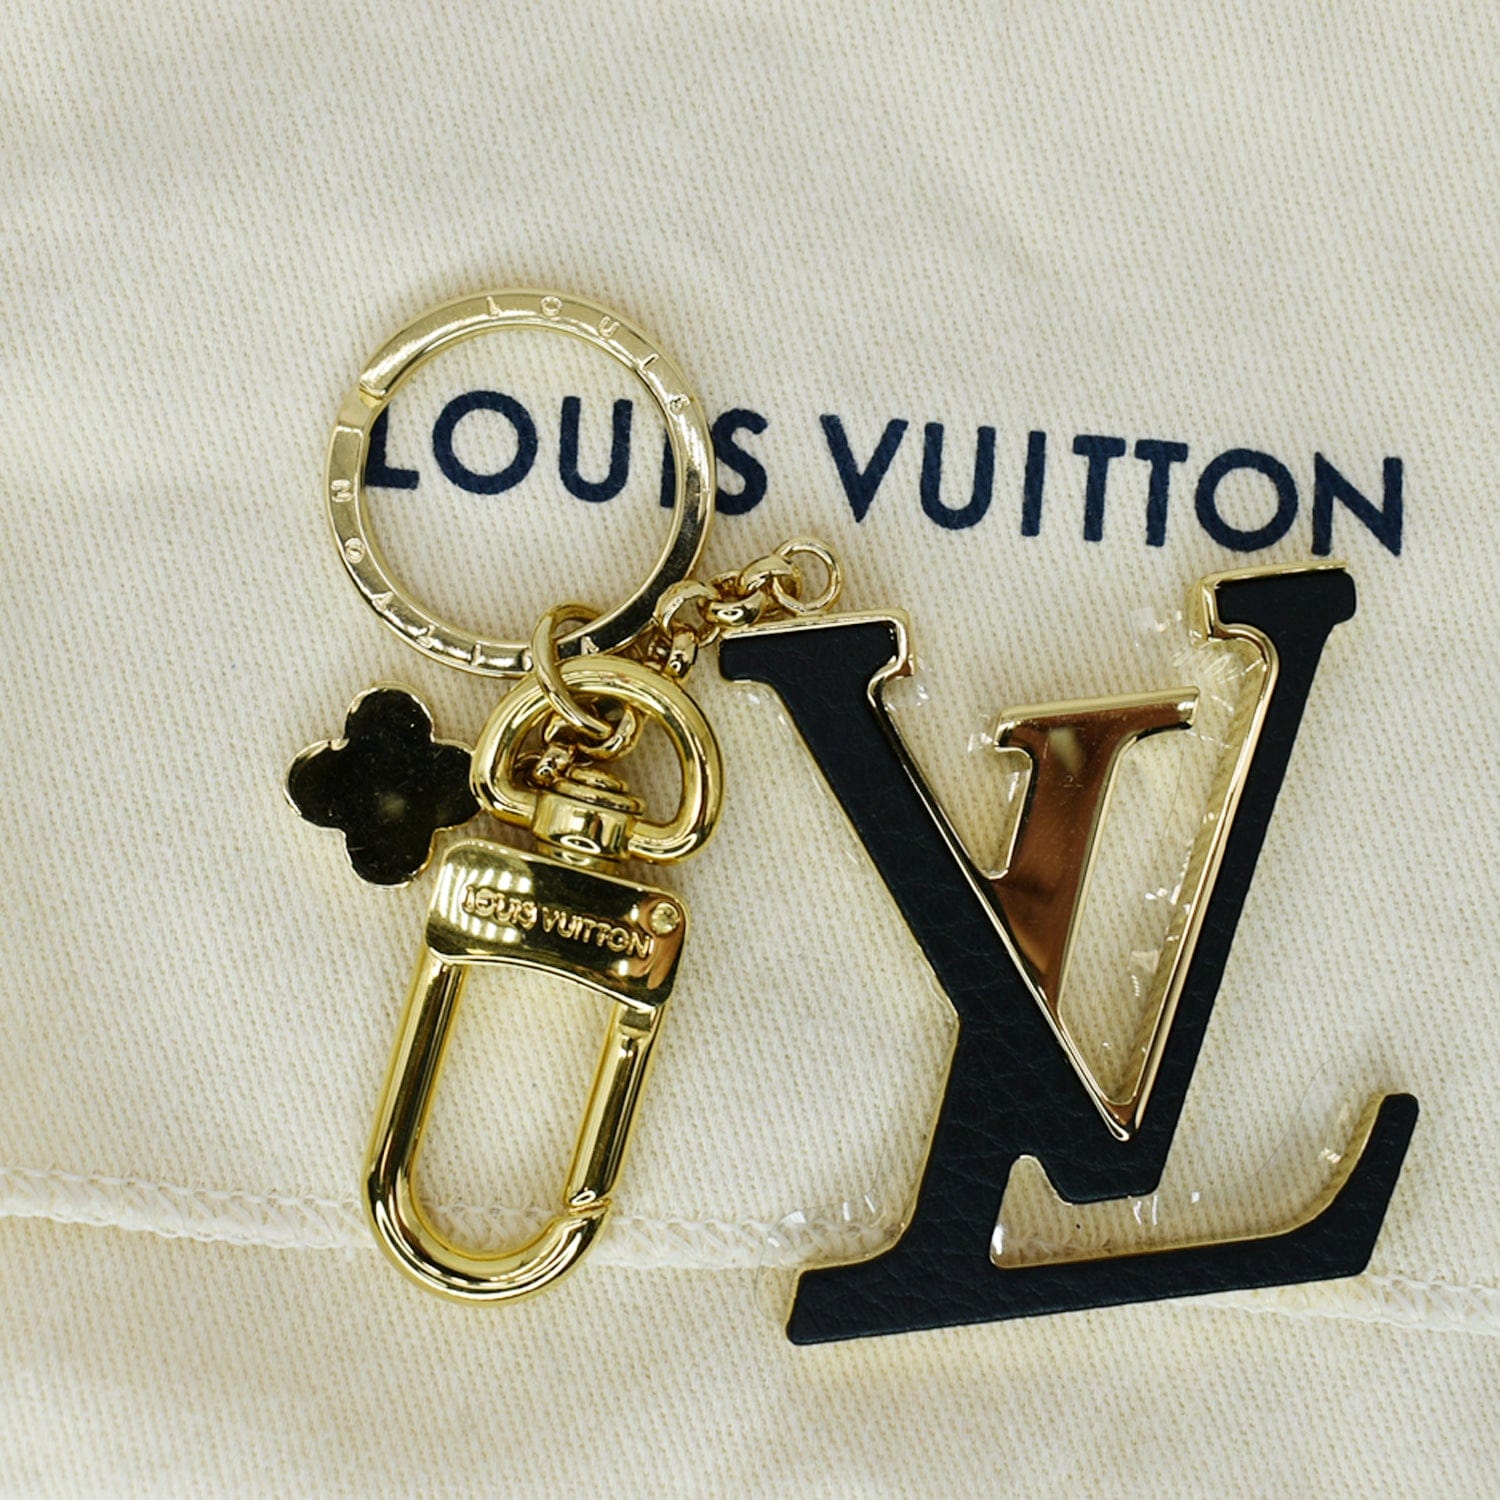 Louis Vuitton Very Bag Charm and Key Holder, Black